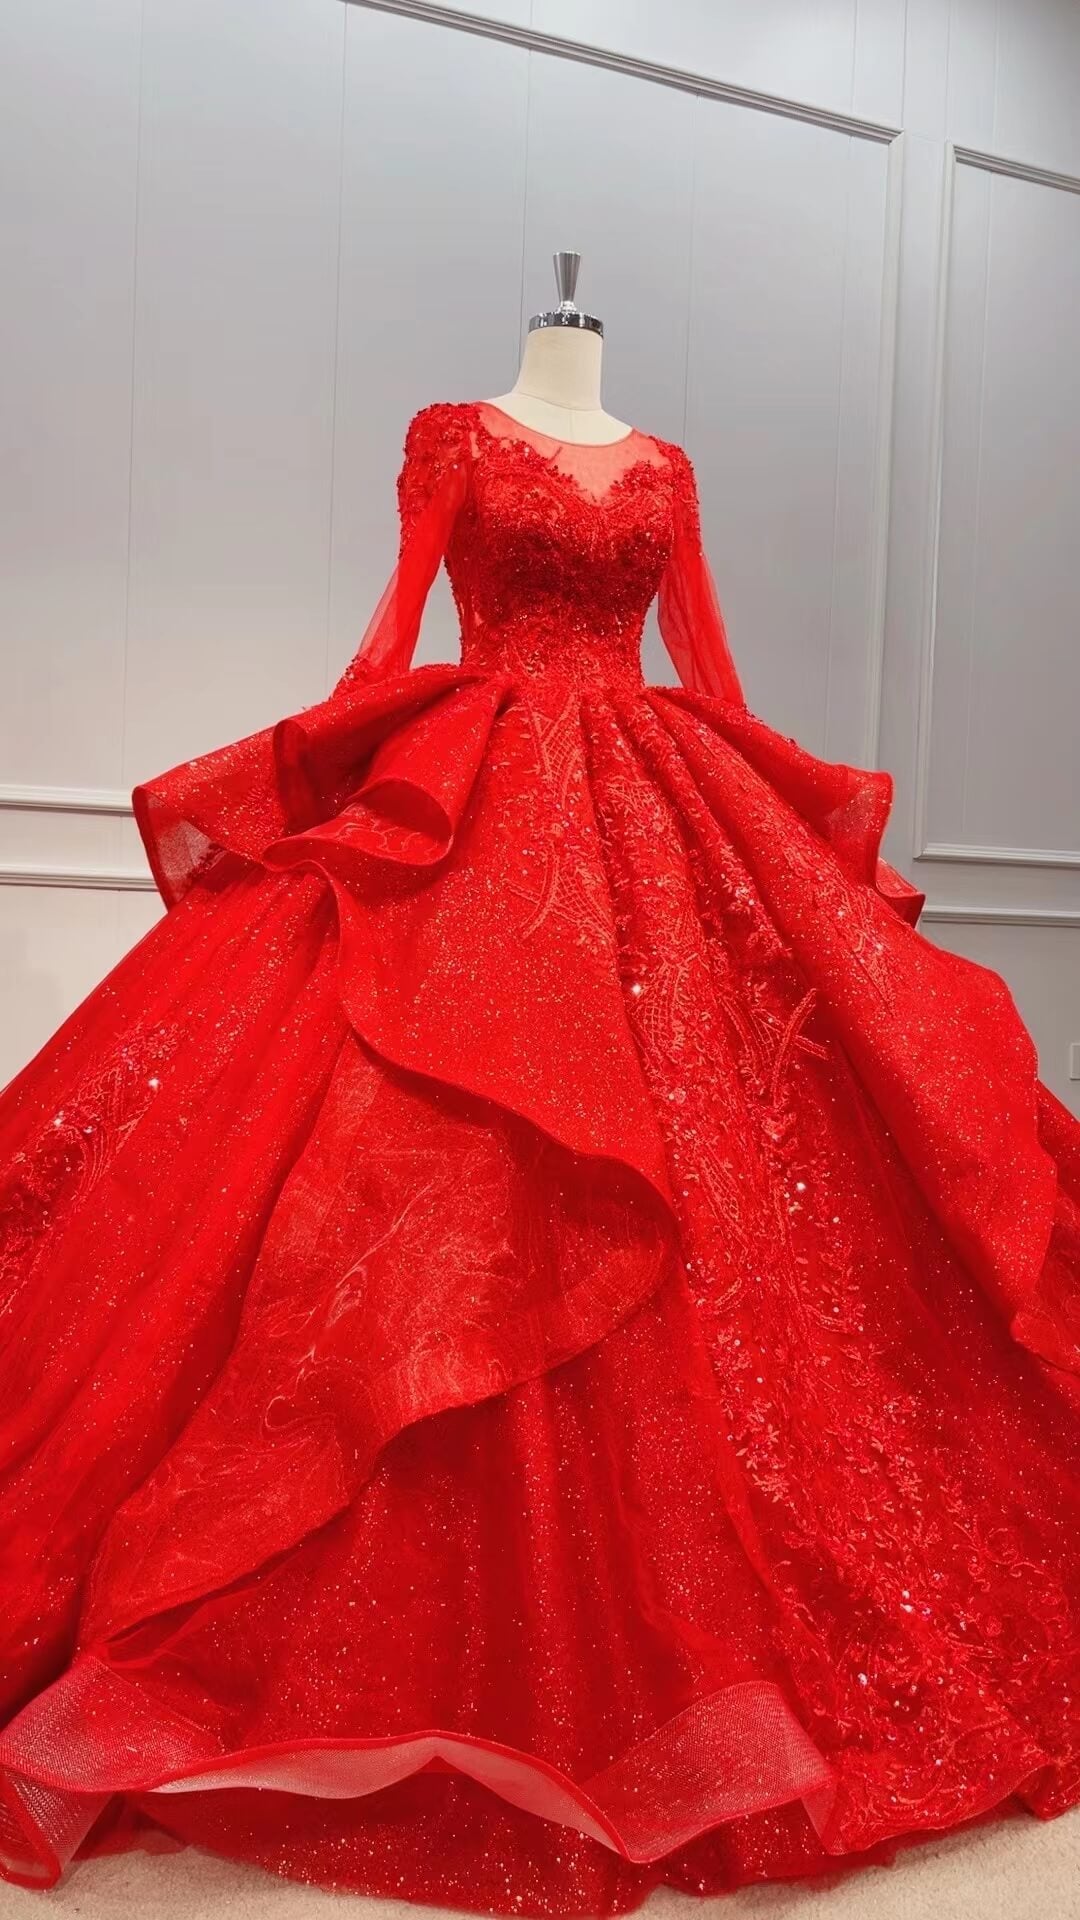 Modest Red Wedding Gowns with Long Sleeves 51012-Quinceanera Dresses-Viniodress-Red-US 2-Viniodress